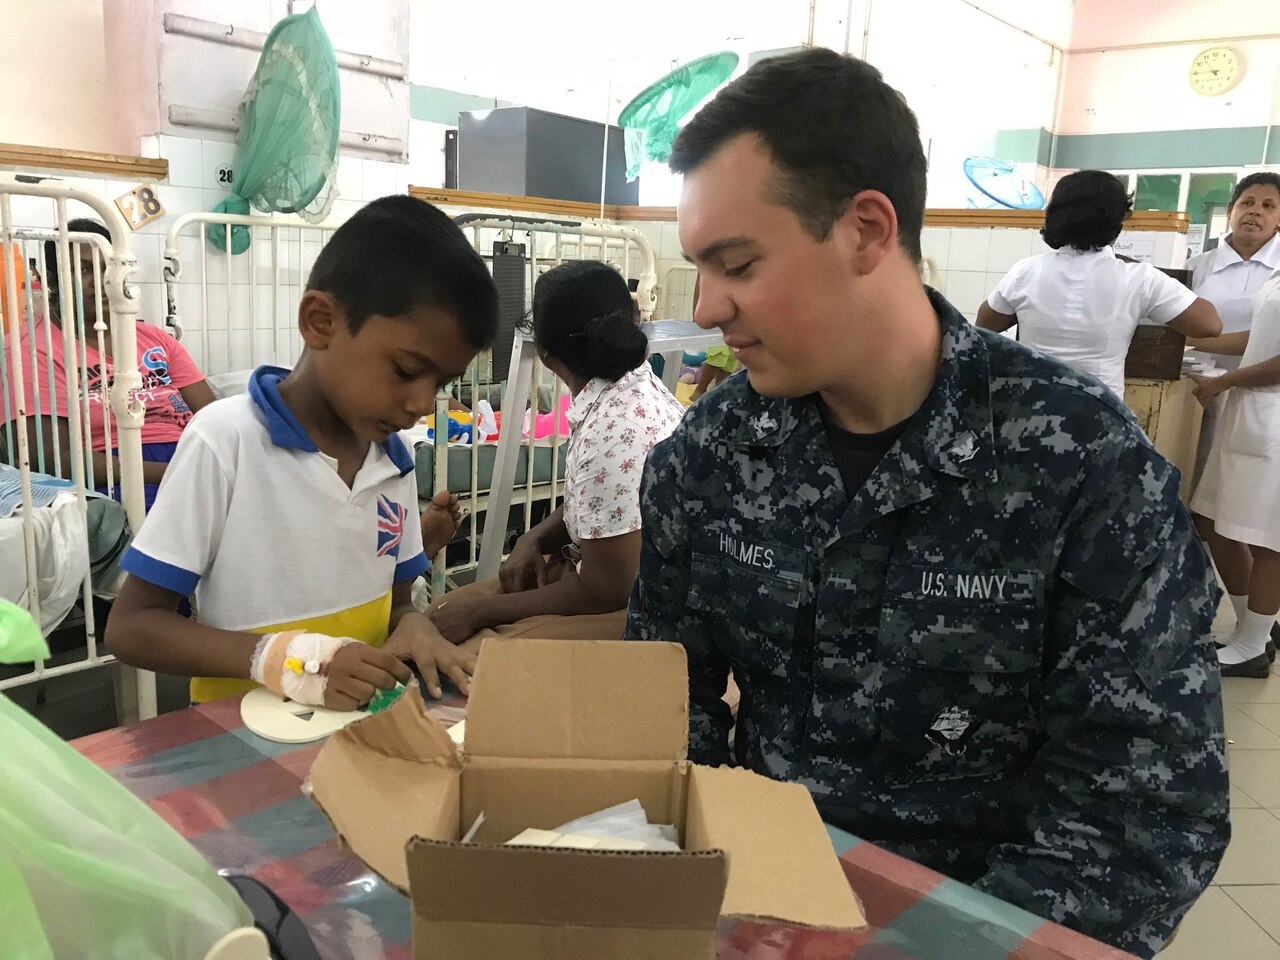 U.S. sailor helps Sri Lankan child with craft project.